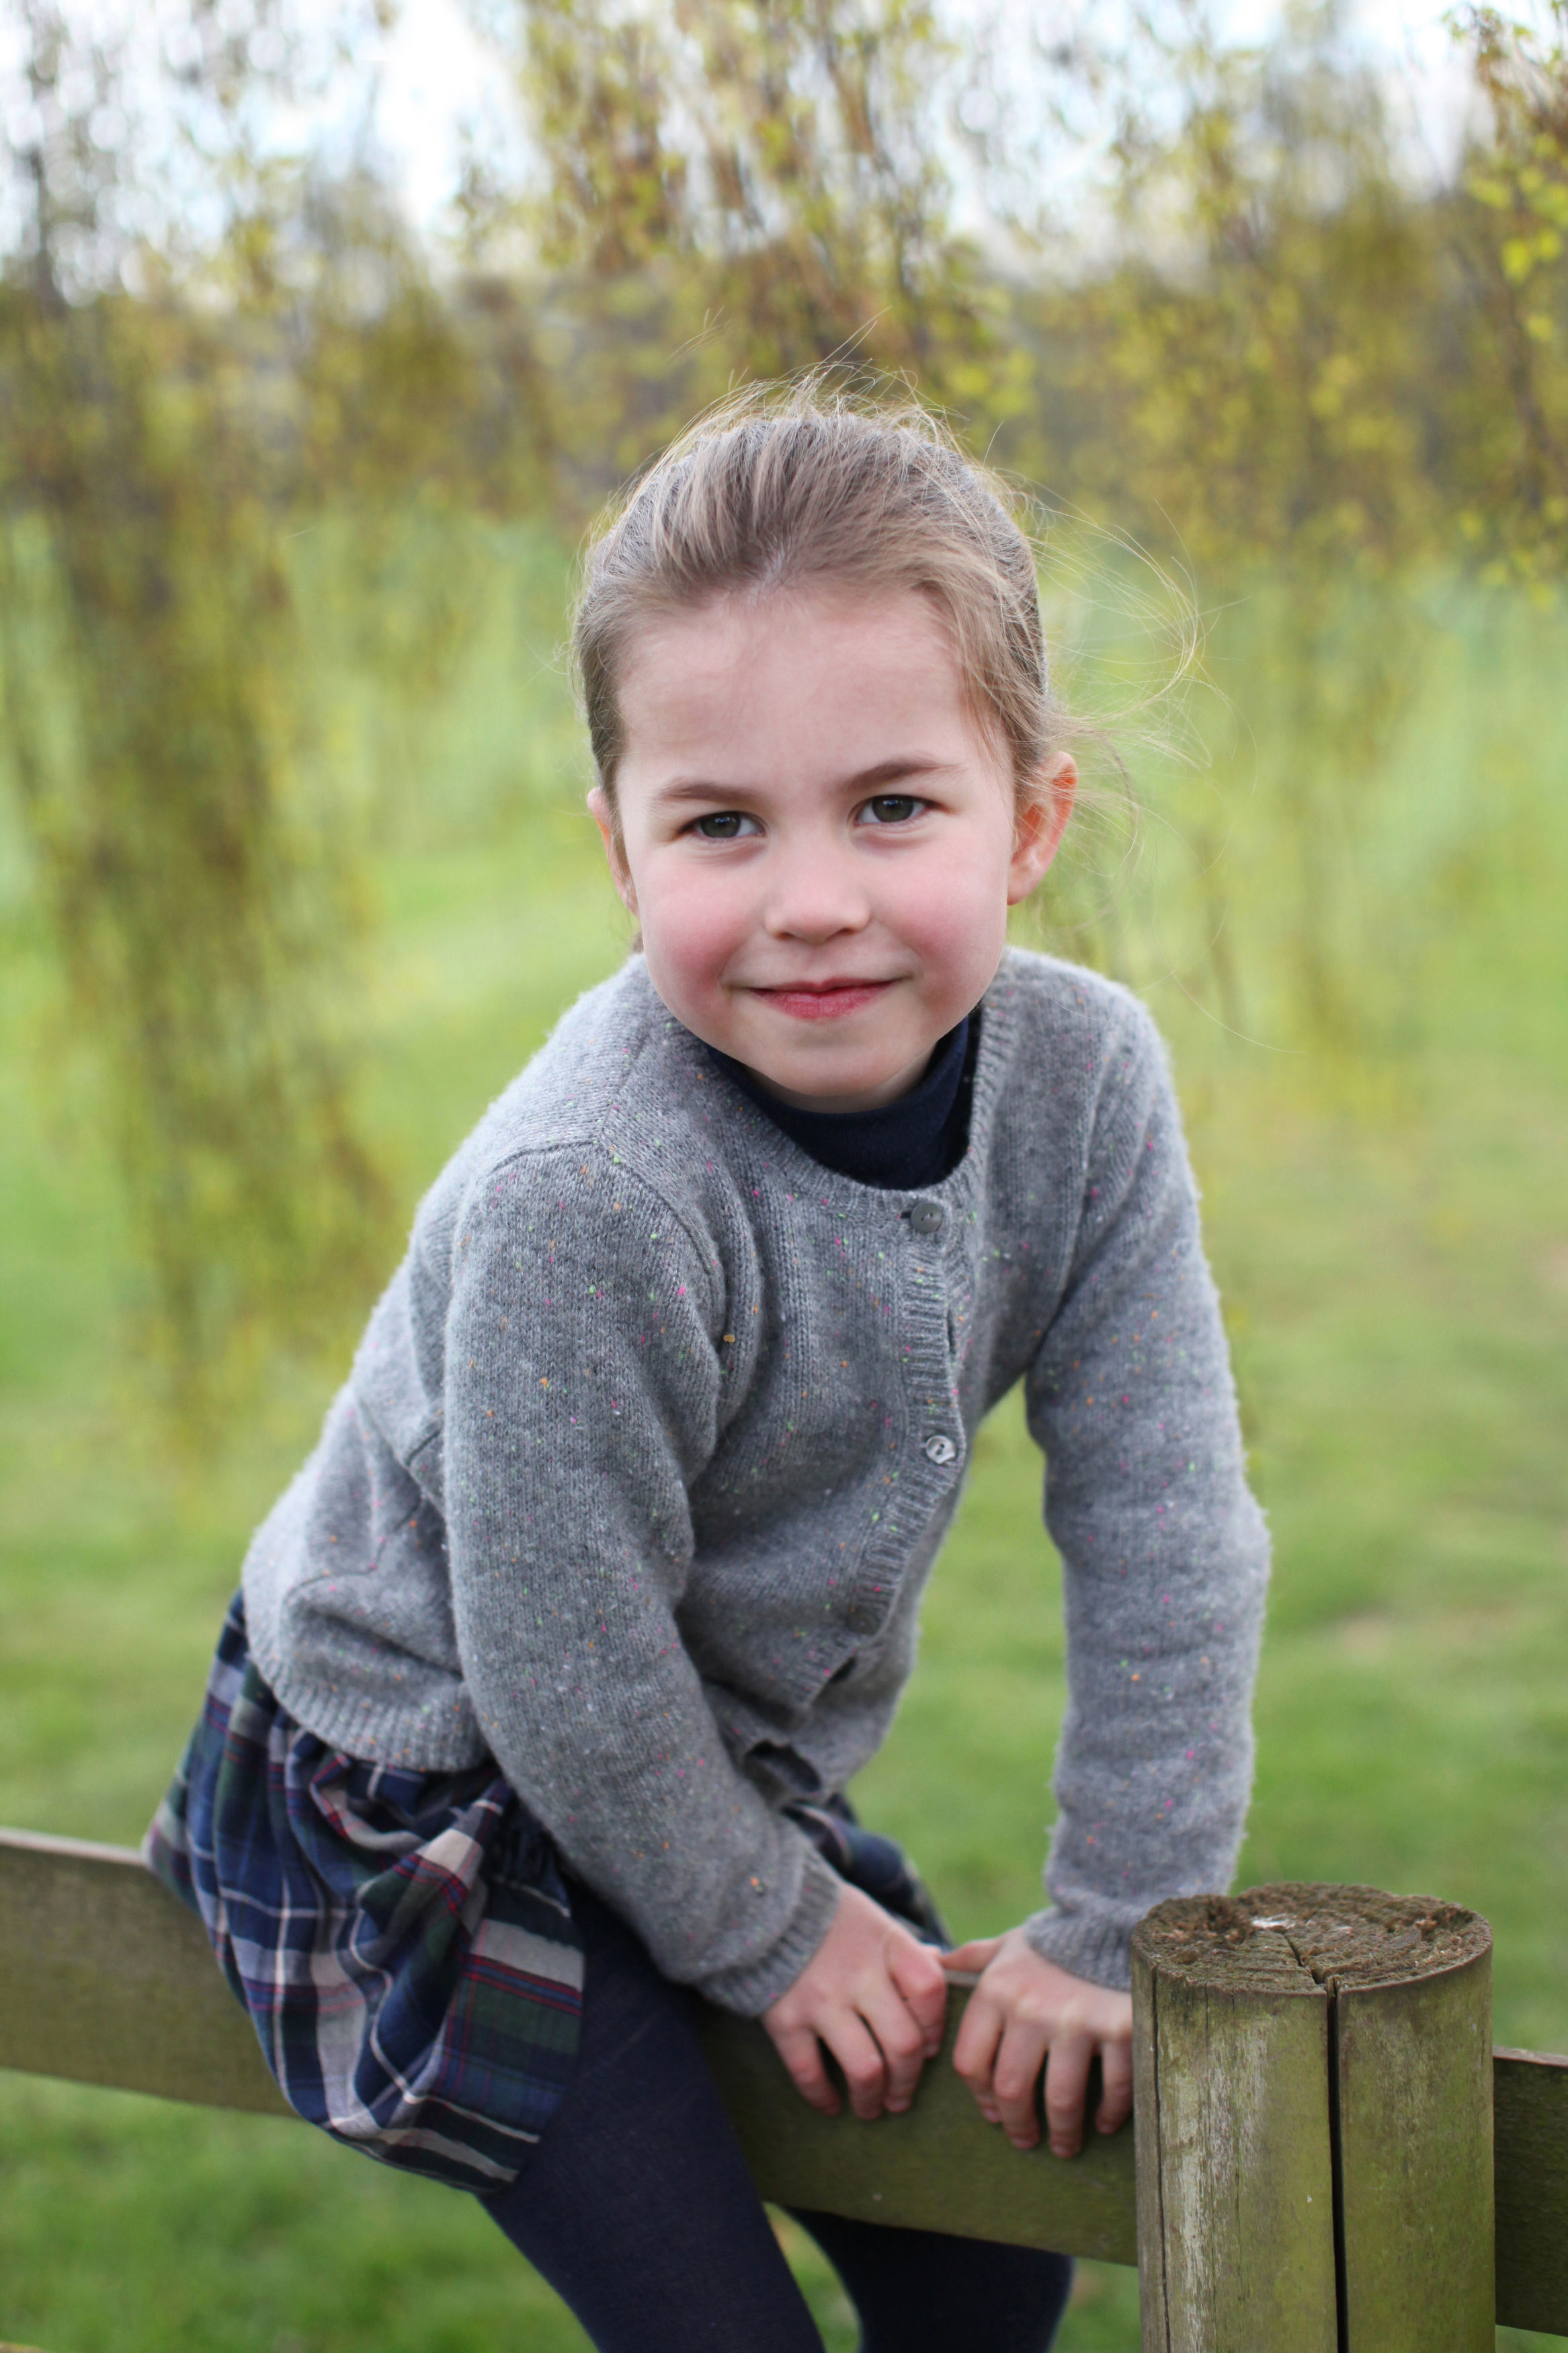 <p>Princess Charlotte posed for her mother, <a href="https://www.wonderwall.com/celebrity/profiles/overview/duchess-kate-1356.article">Duchess Kate</a>, in Norfolk, England, in April 2019 to mark her 4th birthday on May 2, 2019.</p>